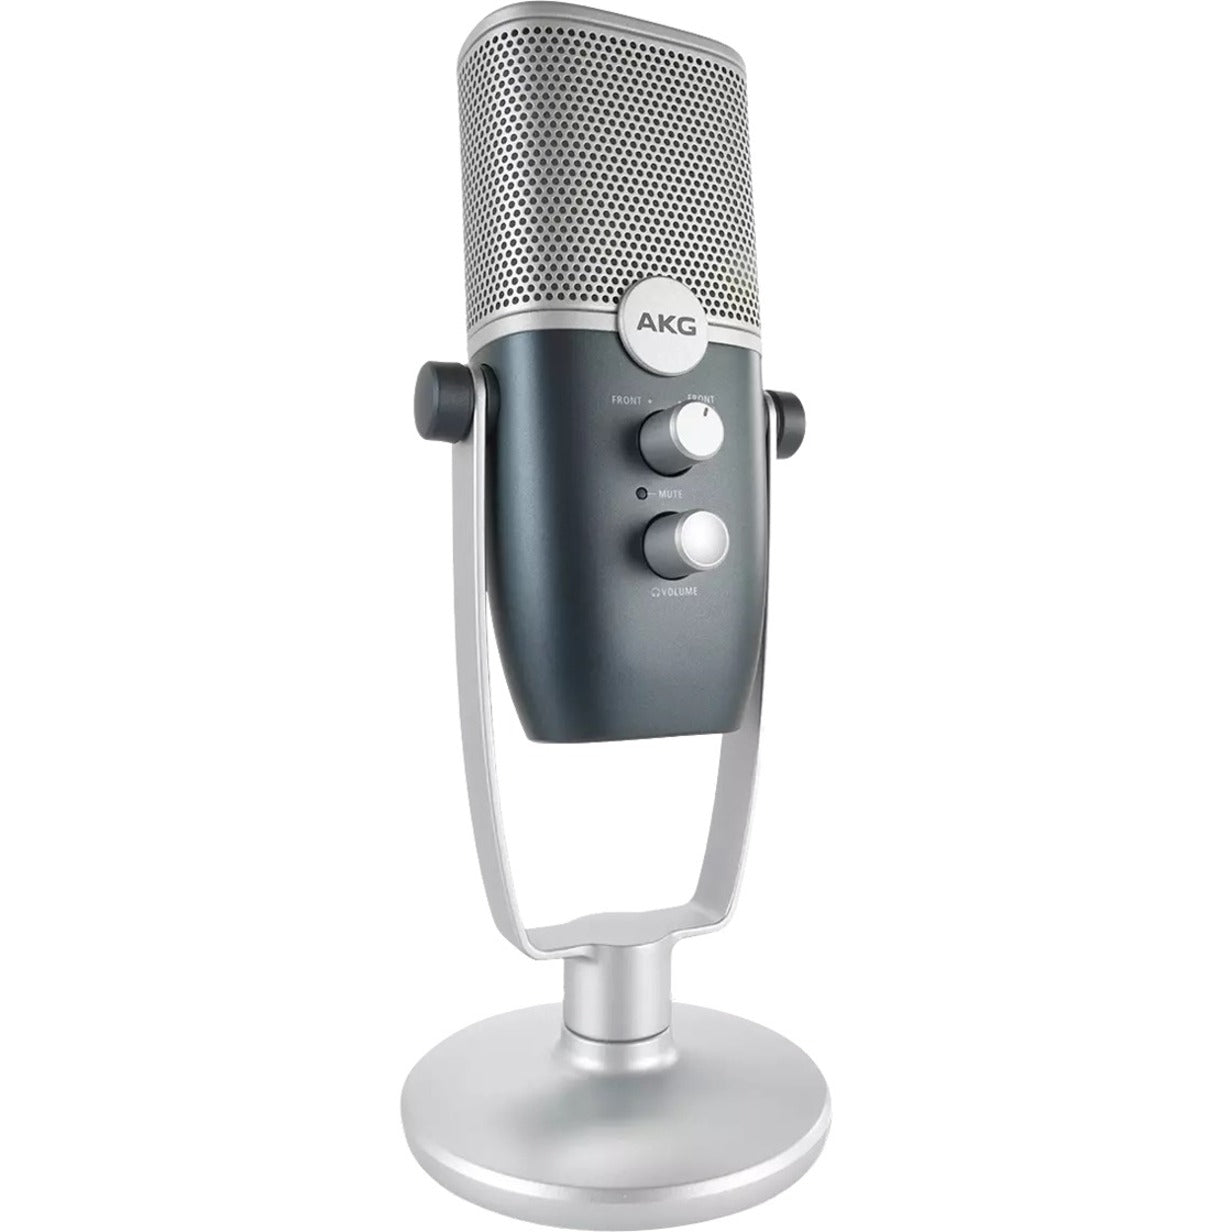 AKG AKG-C22-USB Ara Professional Dual-pattern USB Condenser Microphone, Omni-directional, Directional, Cardioid, Boom, Stand Mountable, Desktop, Video Blogging, Video Conferencing, Live Streaming, Podcasting, Recording, Gaming, Mac, iOS, Android, PC